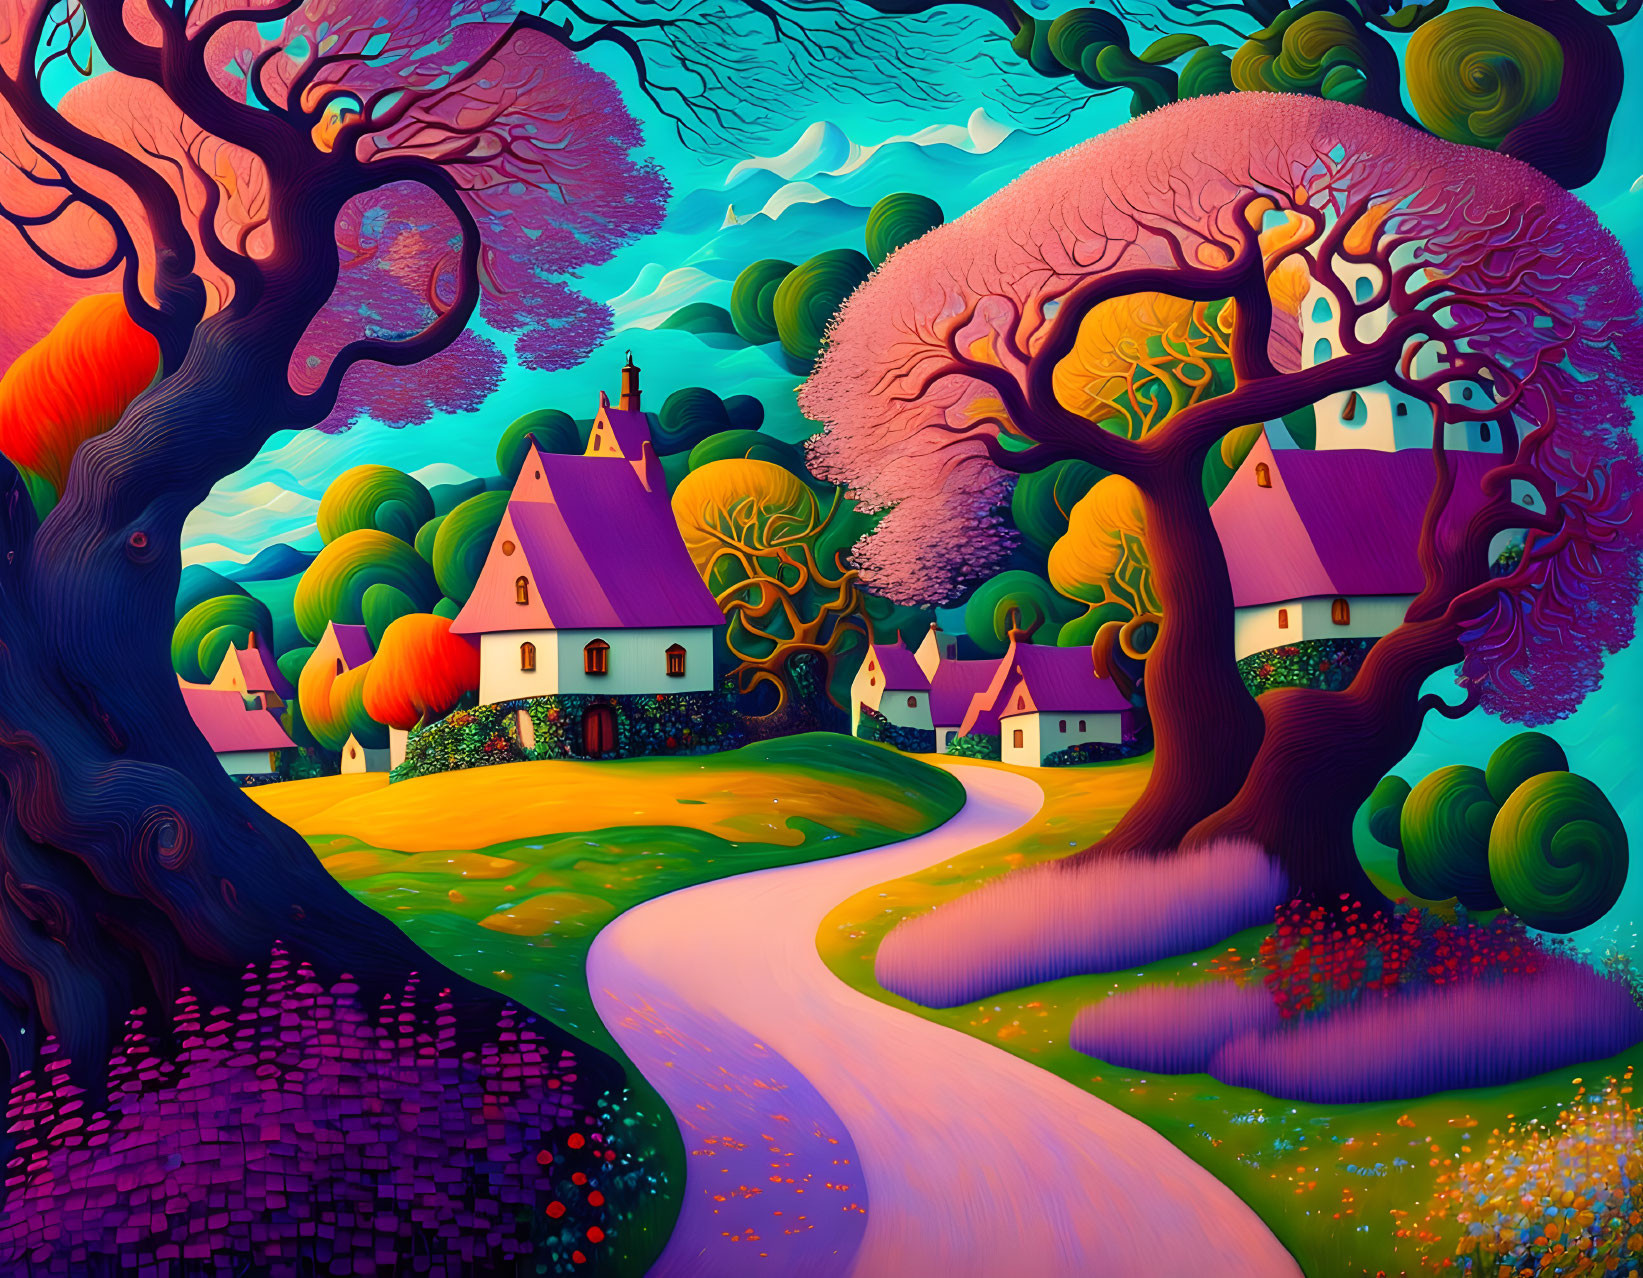 Surreal landscape with stylized trees, winding path, quaint houses, hills, and vivid blue